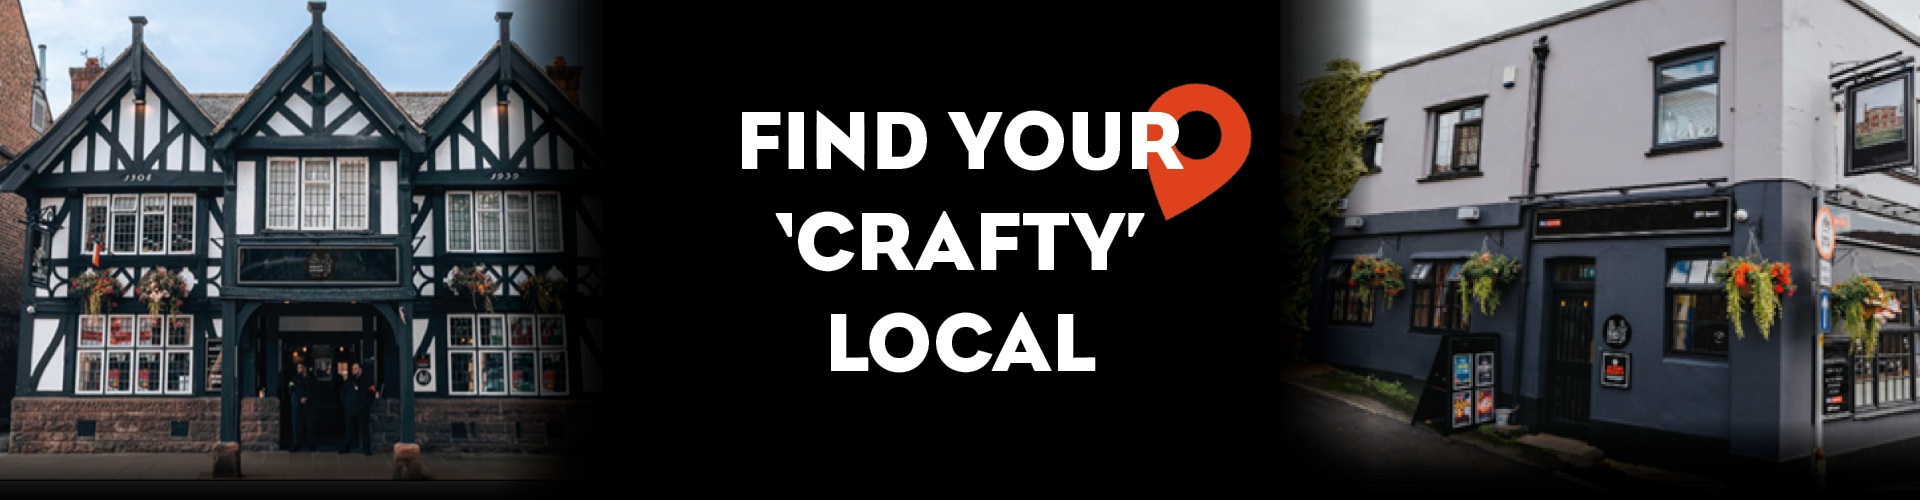 Find your 'Crafty' local